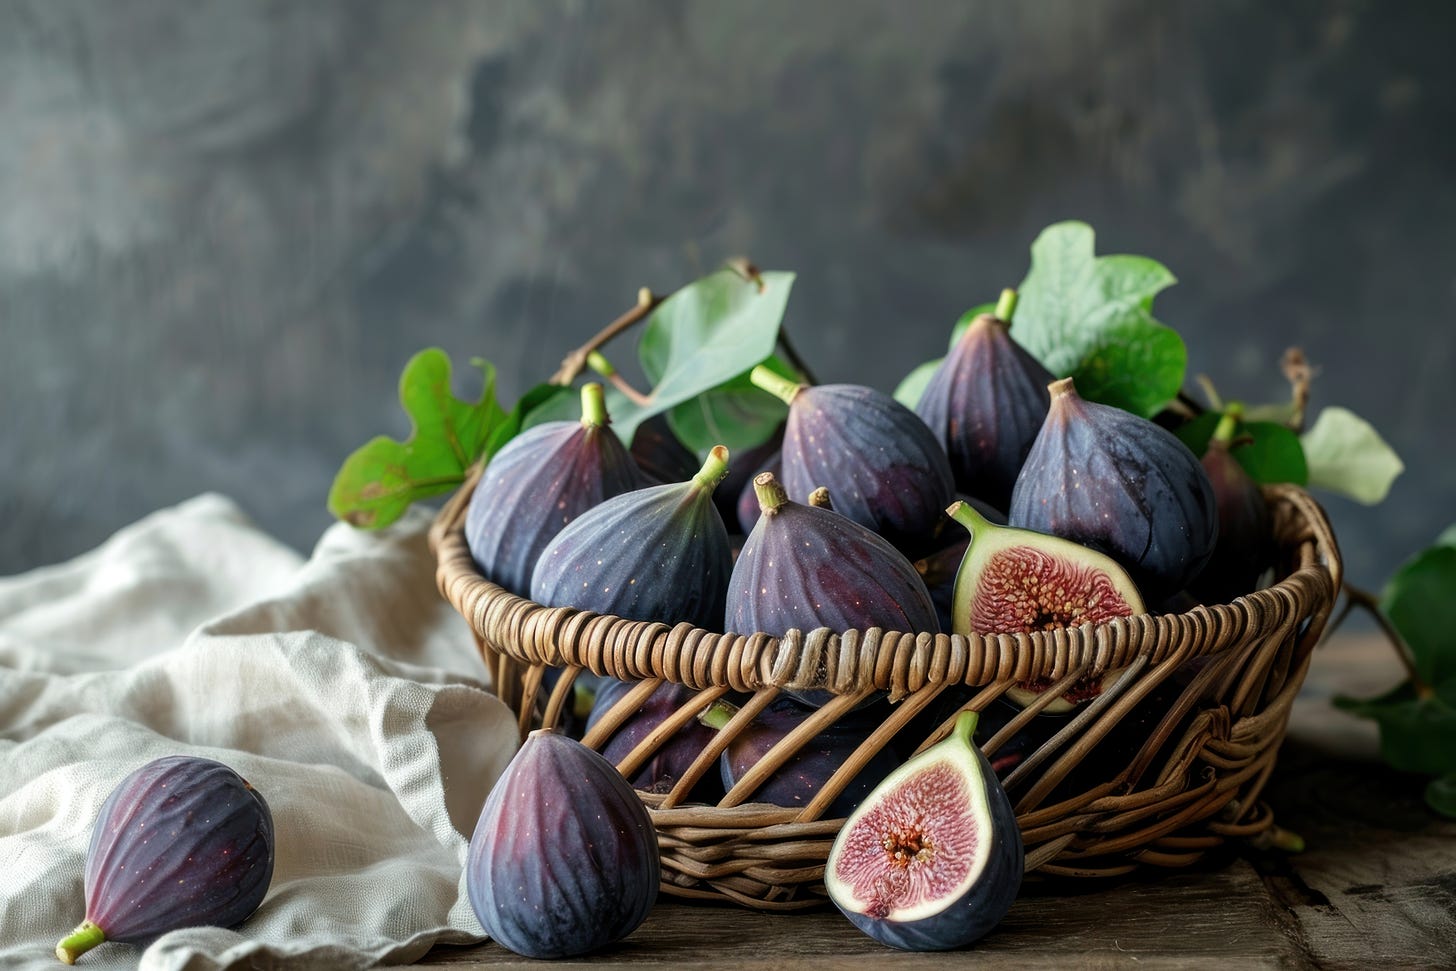 A wicker basket of figs, on a table with linens